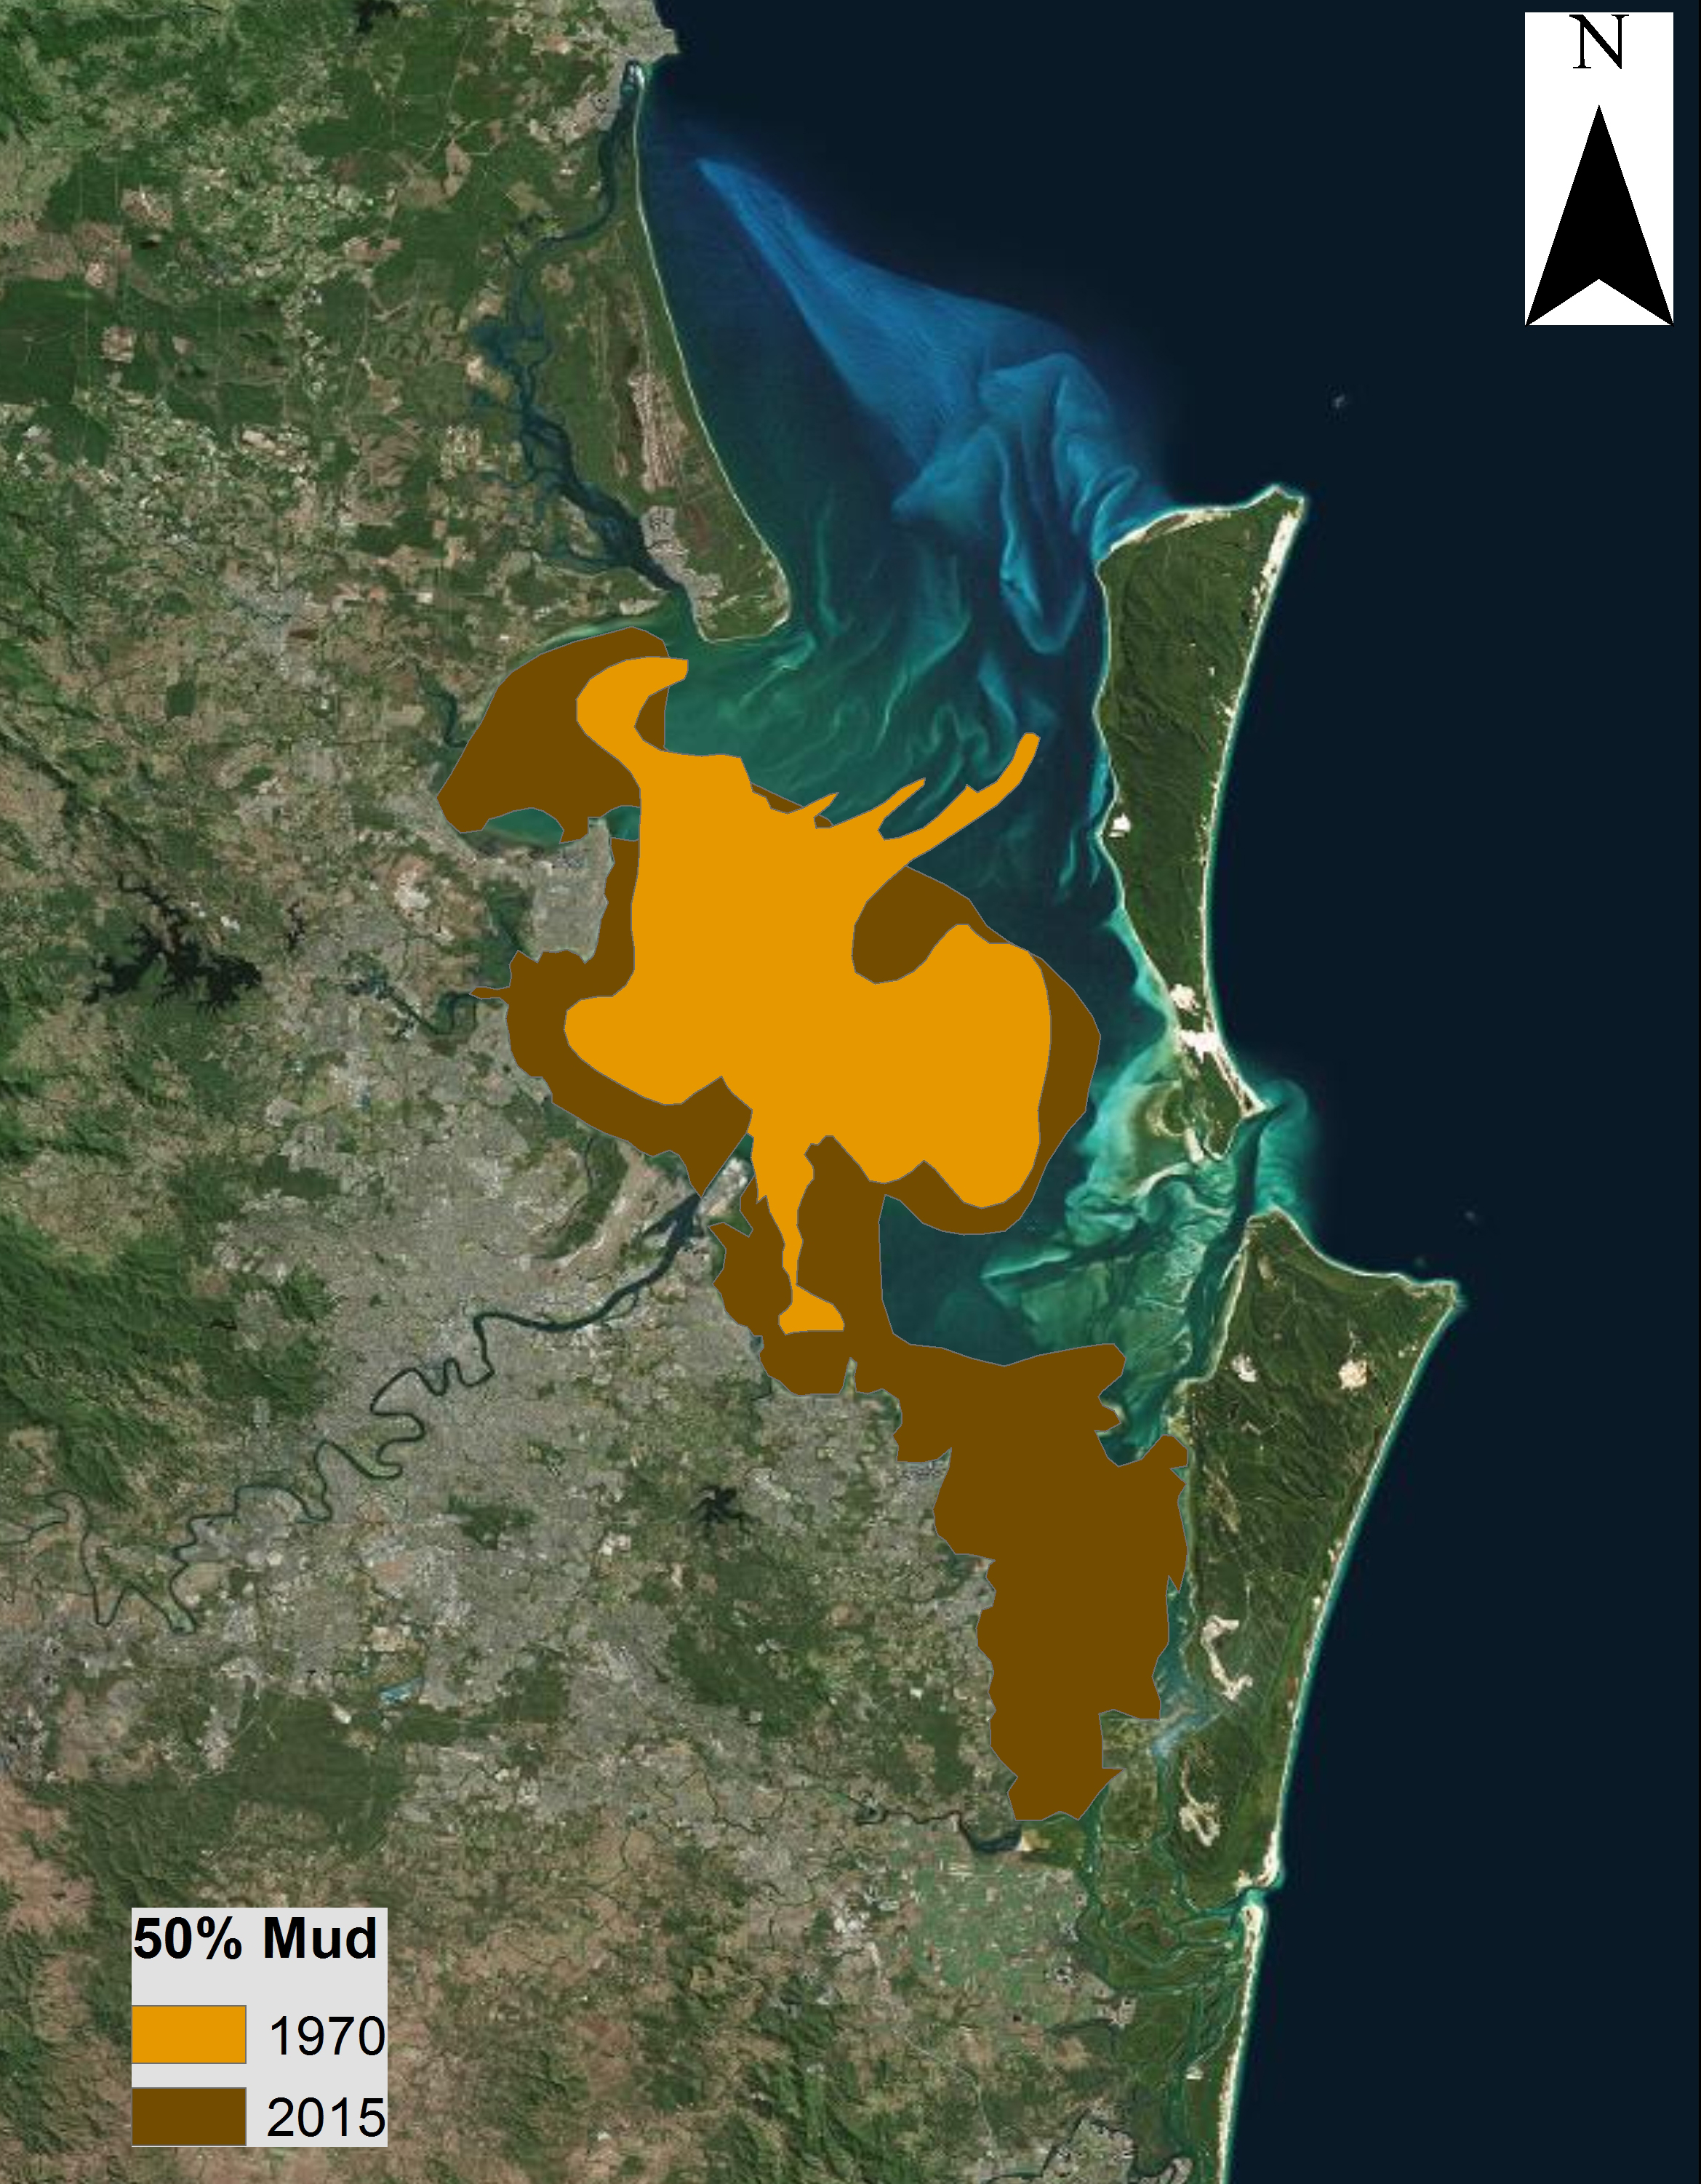 The yellow area was mud in 1970; the brown area is mud in the latest survey.